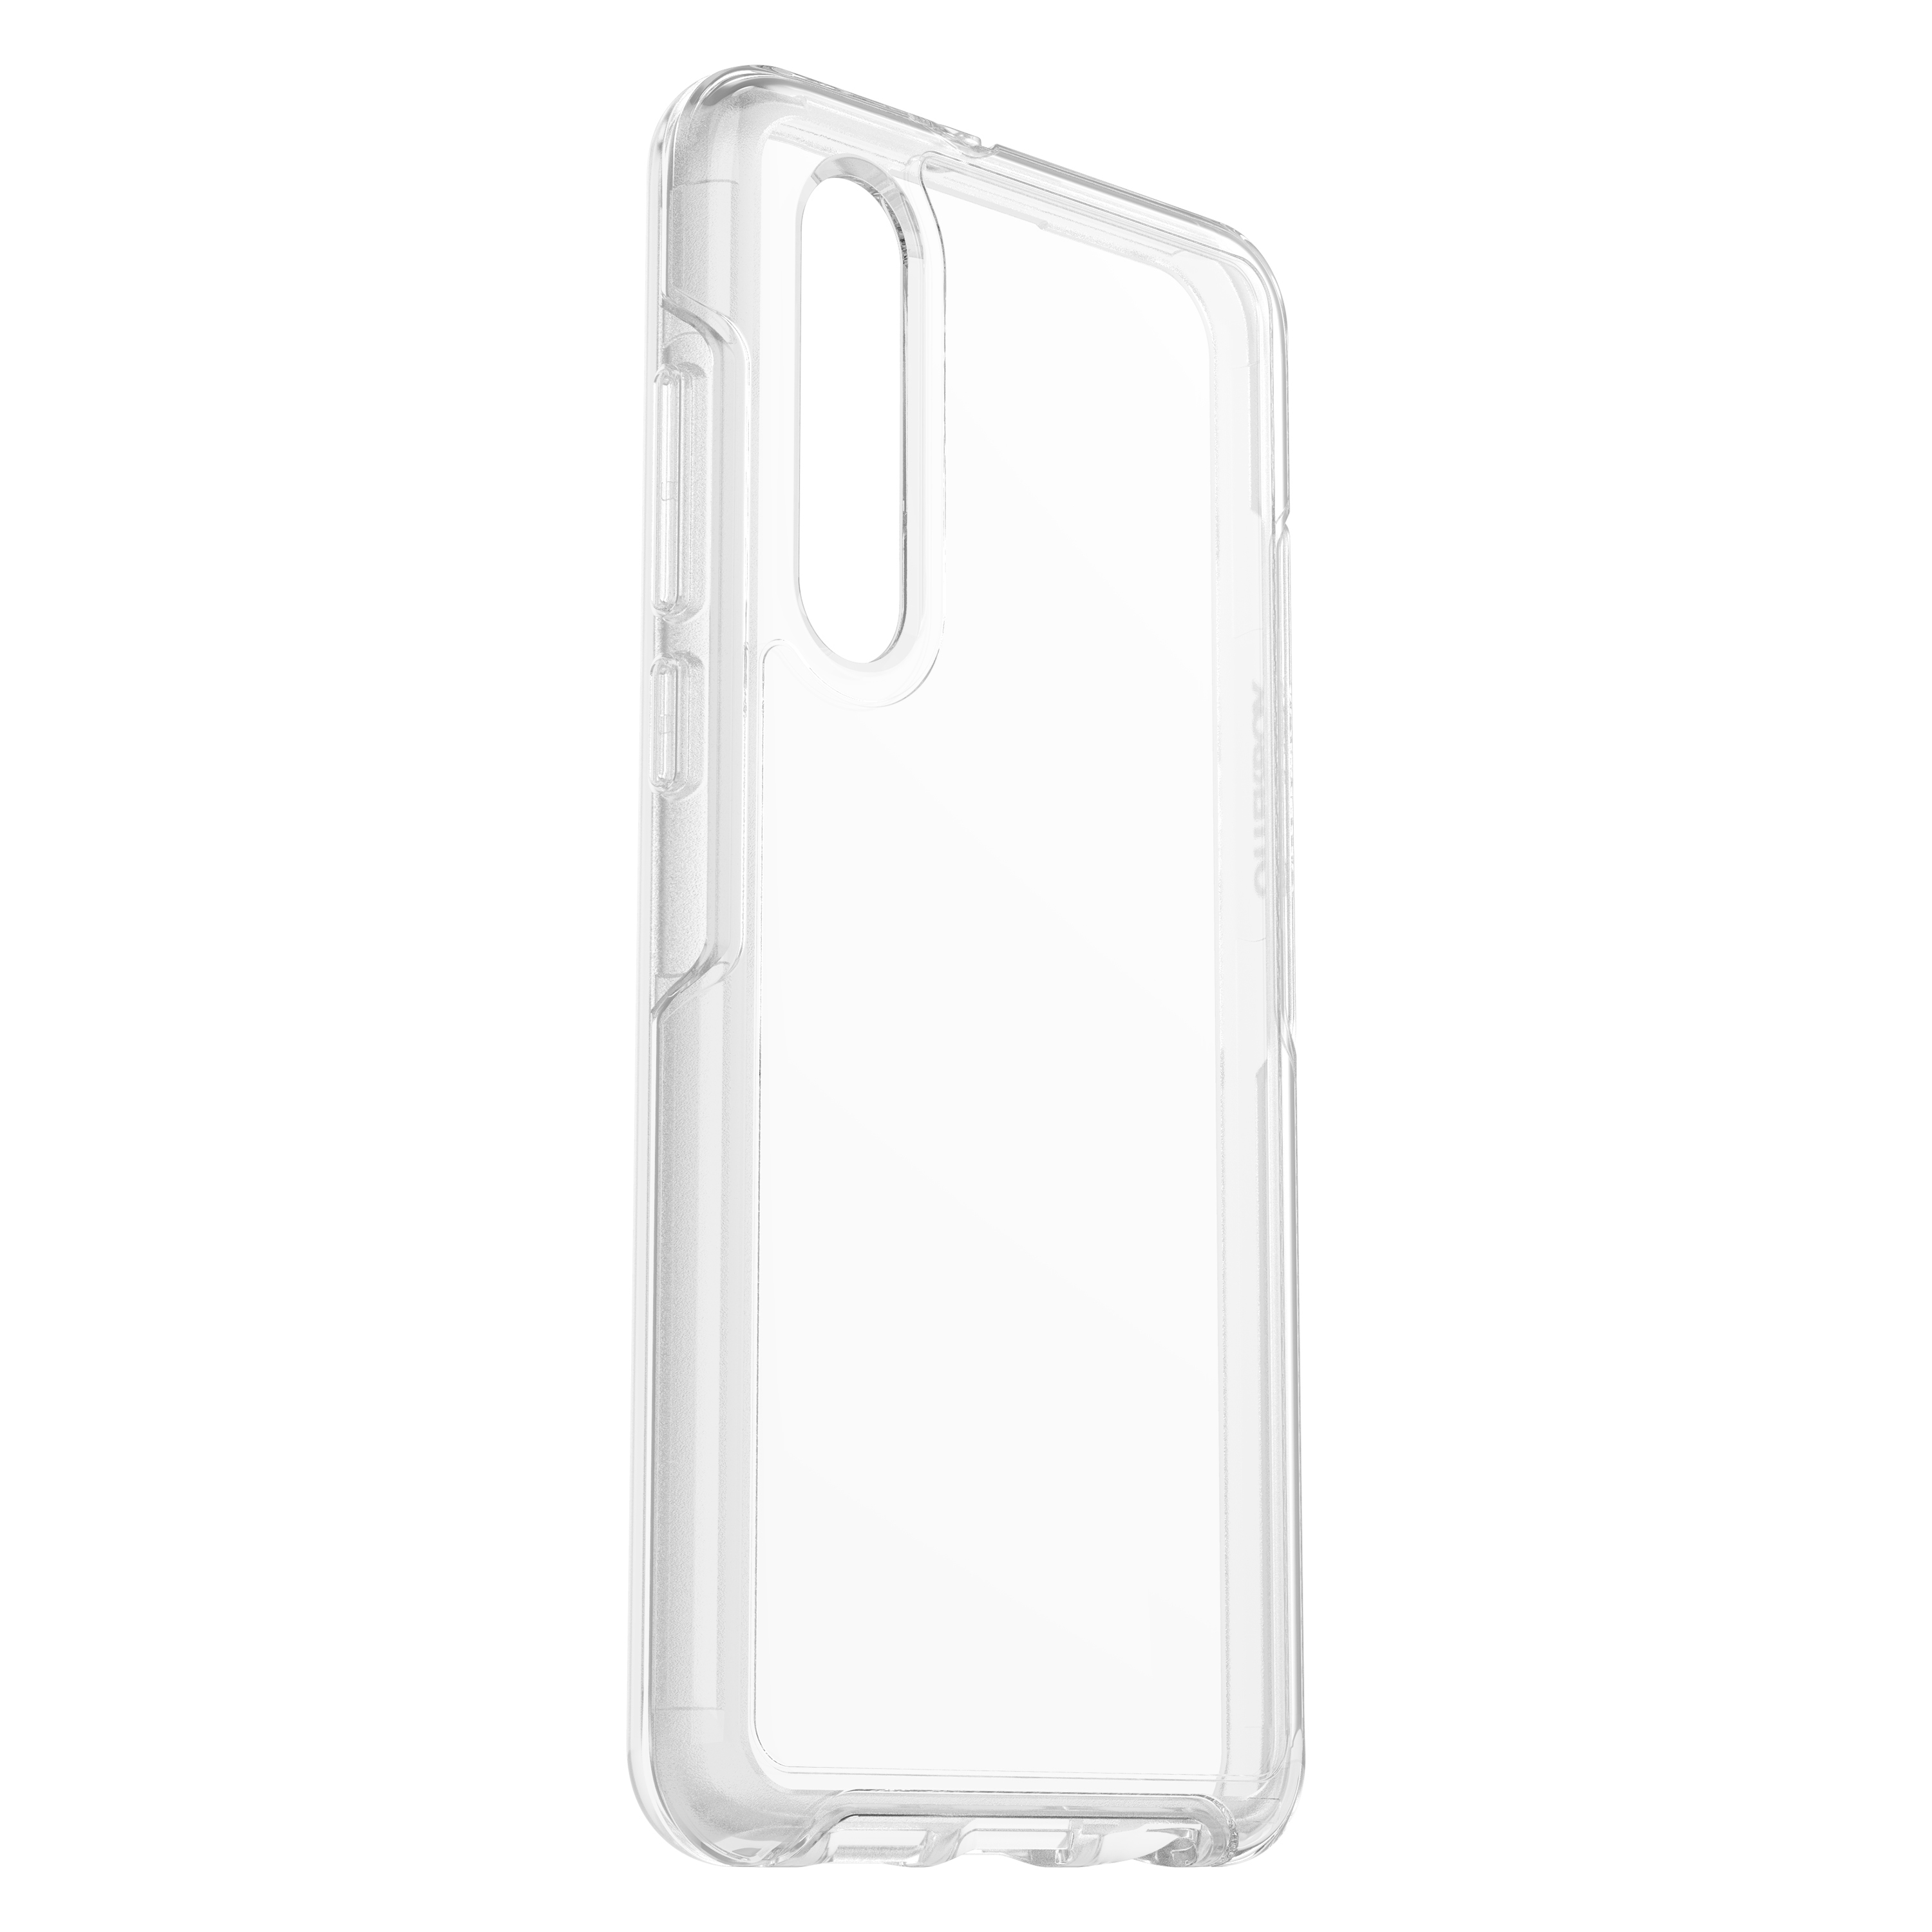 OTTERBOX Symmetry, Backcover, Transparent Huawei, P30